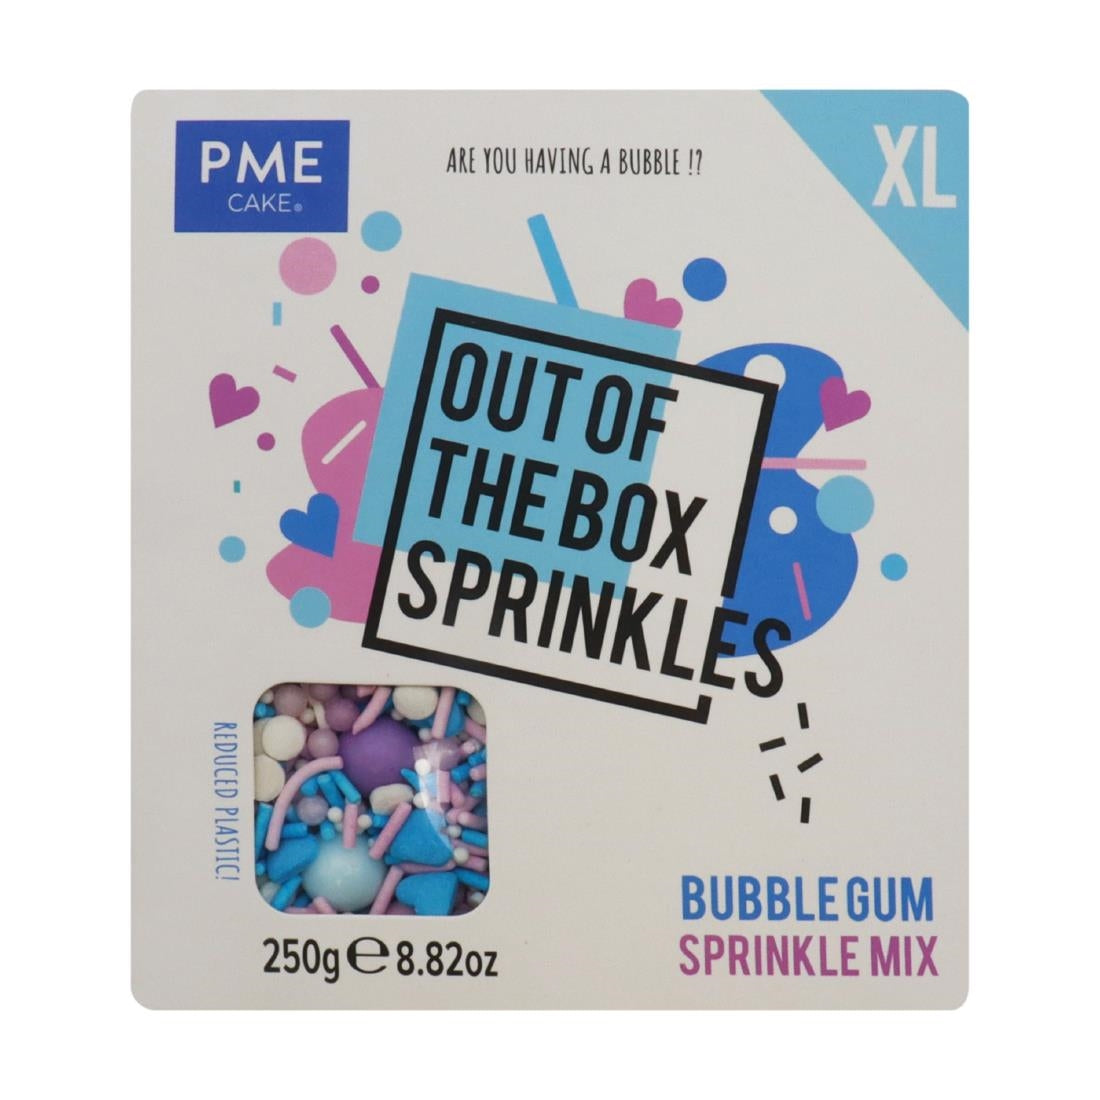 HU365 PME XL Out of the Box Sprinkle Mix Bubble Gum 250g